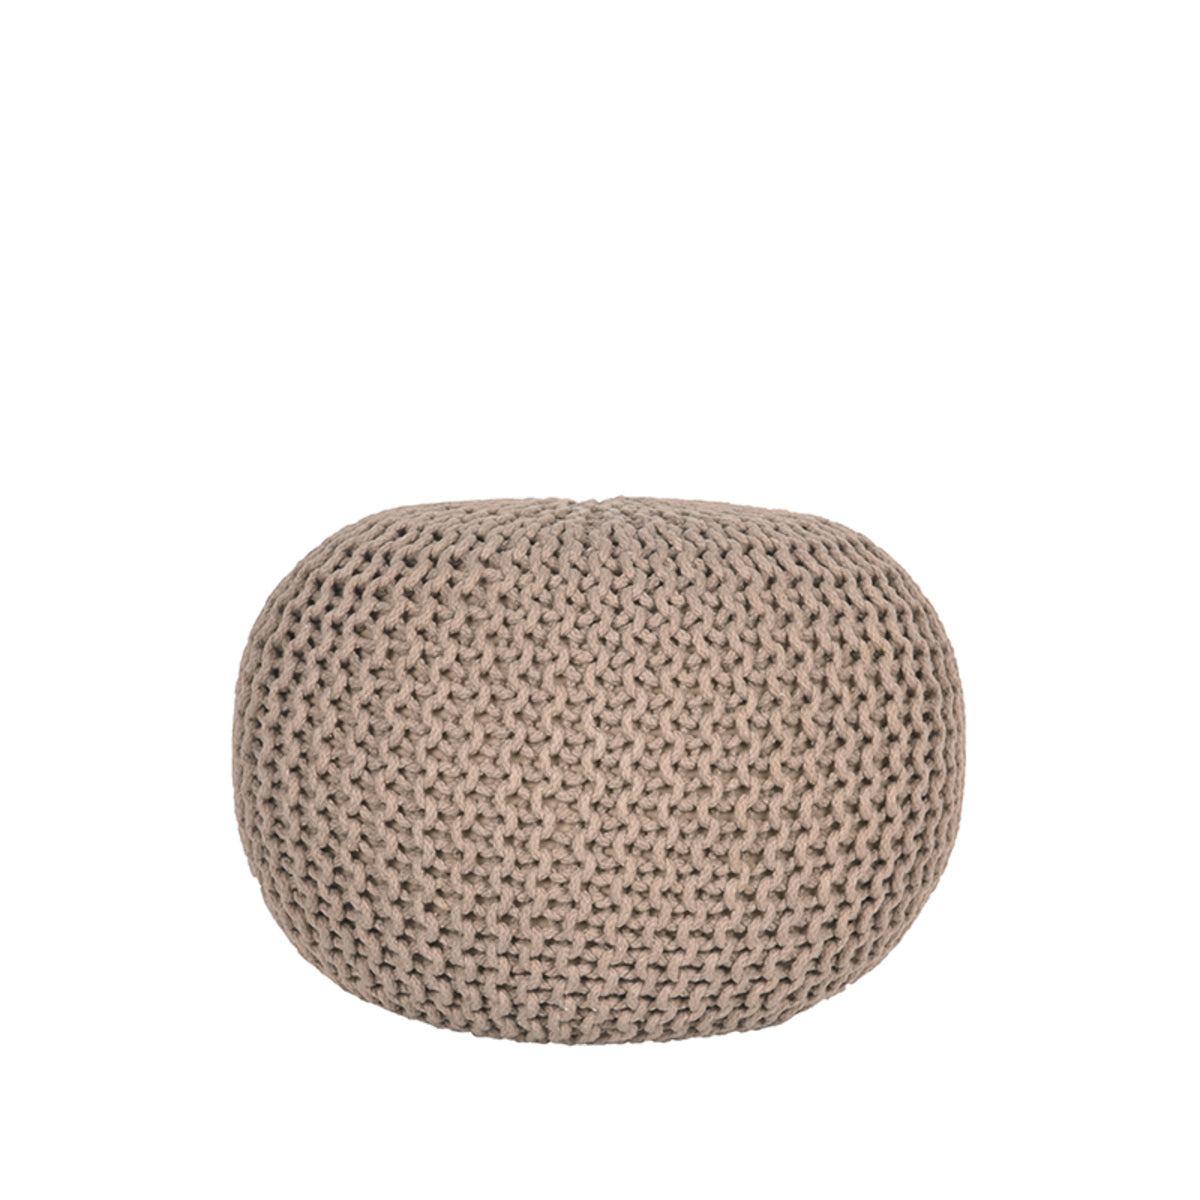 LABEL51 Pouf Knitted - Beige - Cotton - M